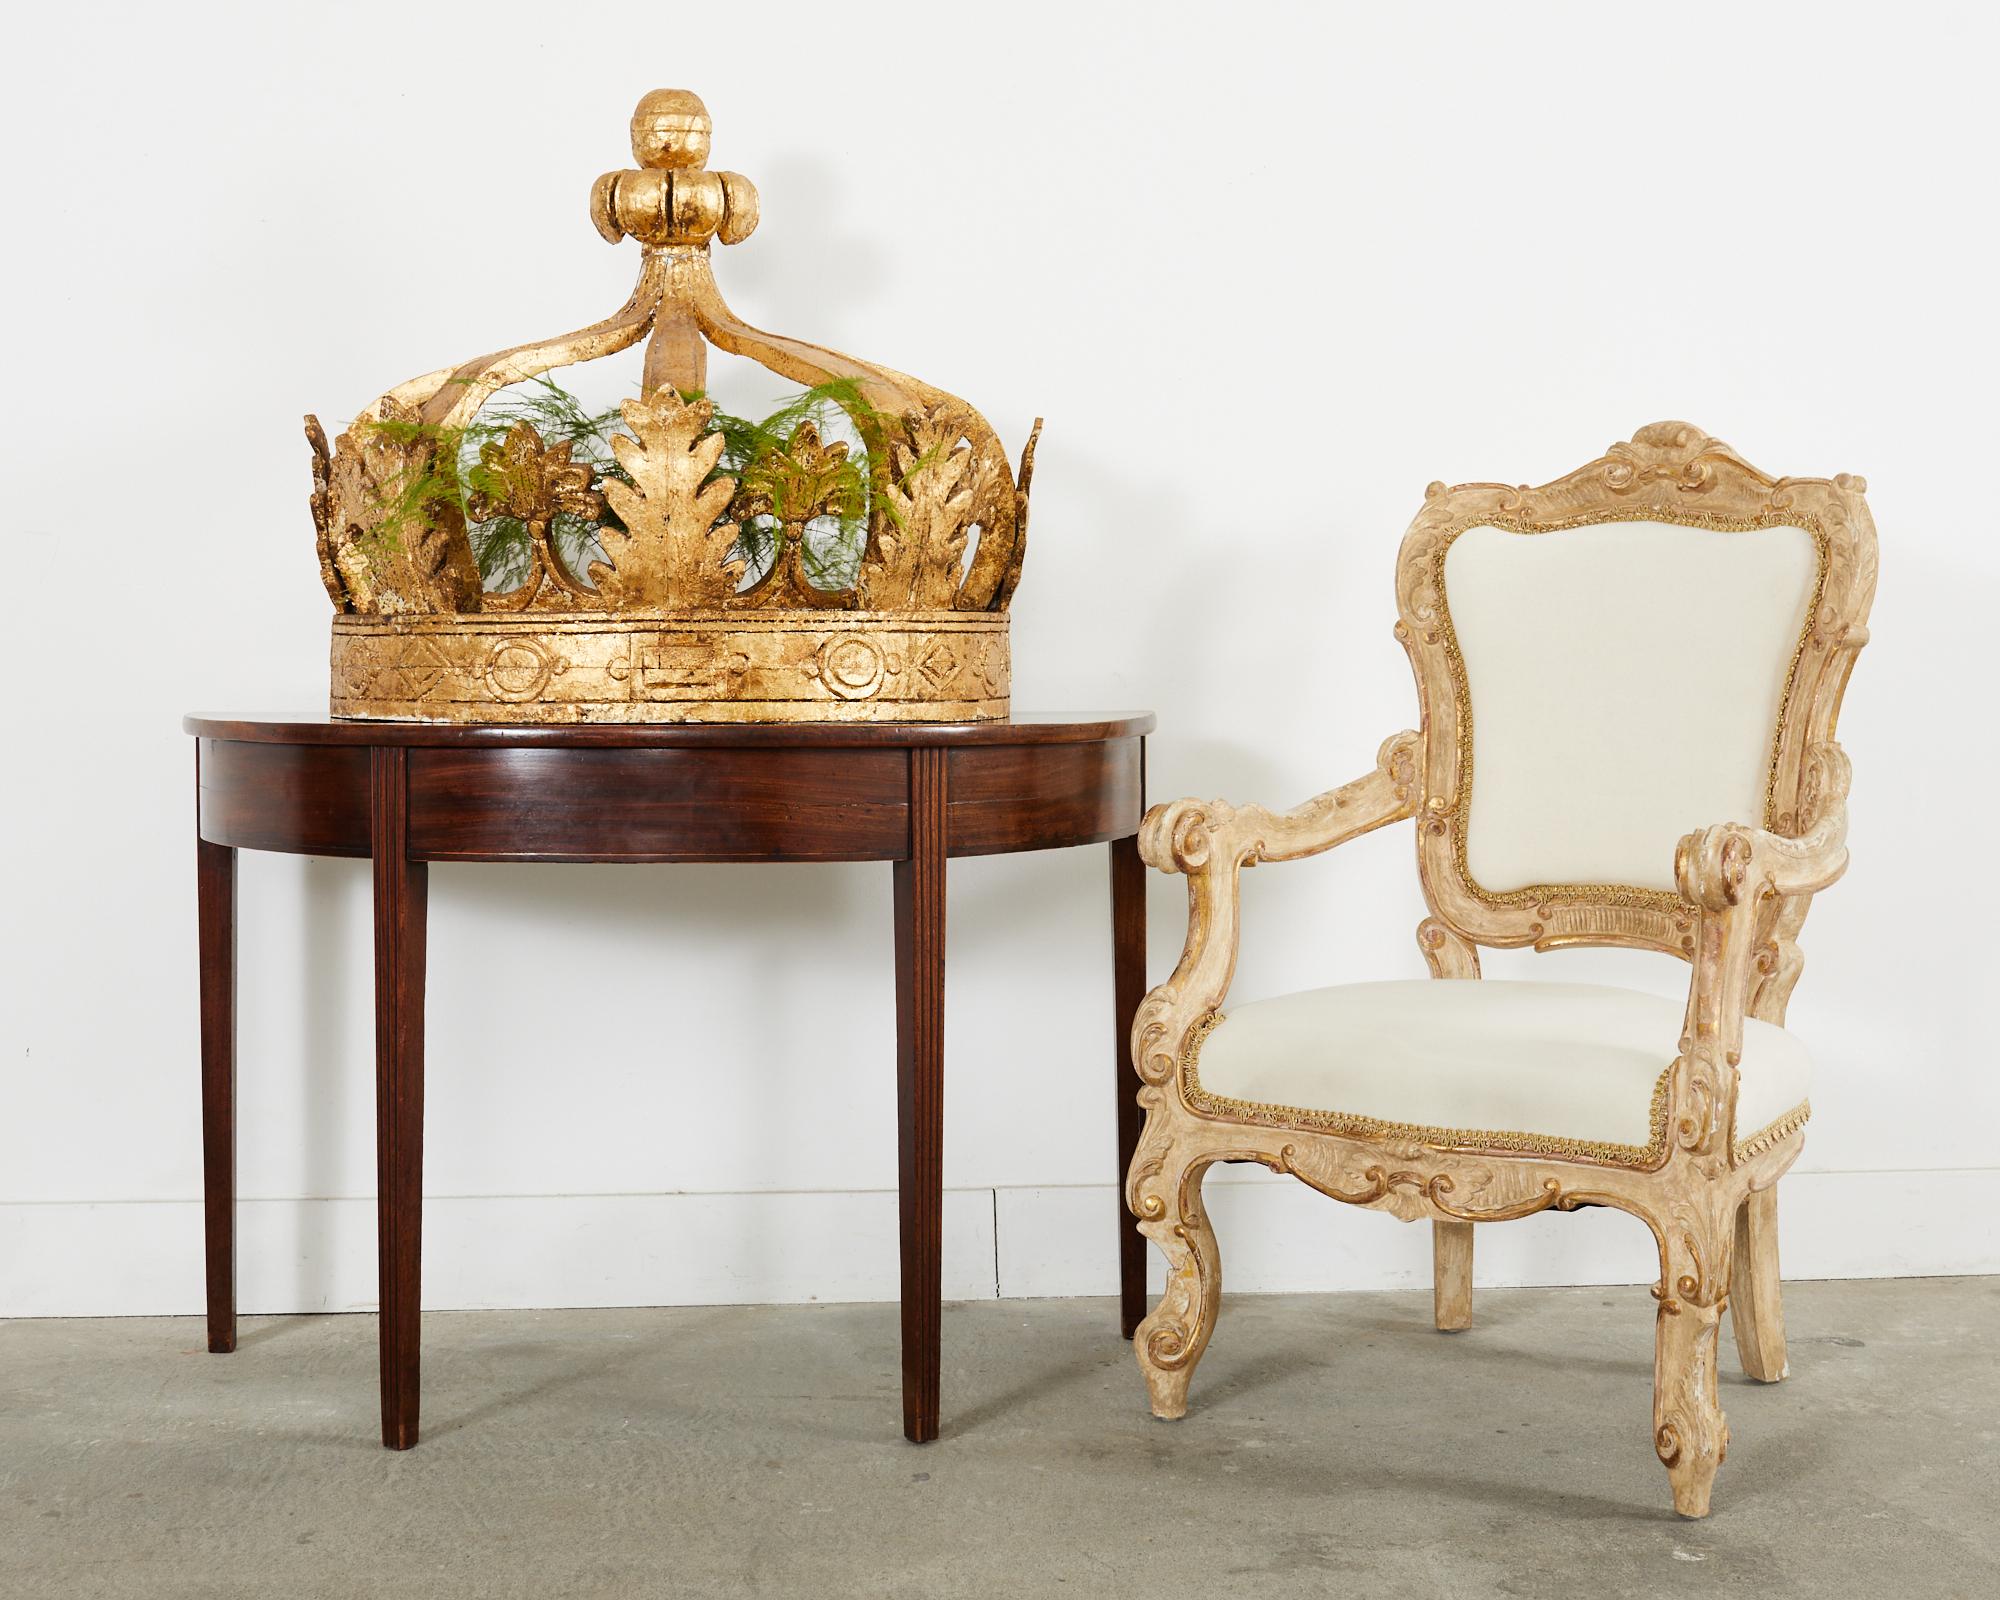 Dramatic pair of large 19th century Italian bed coronas or crowns made in the Baroque taste. The coronas feature demi-lune shaped frames embellished with gold leaf and decorated with delicate acanthus leaves and stylized fleur de lis motifs. The